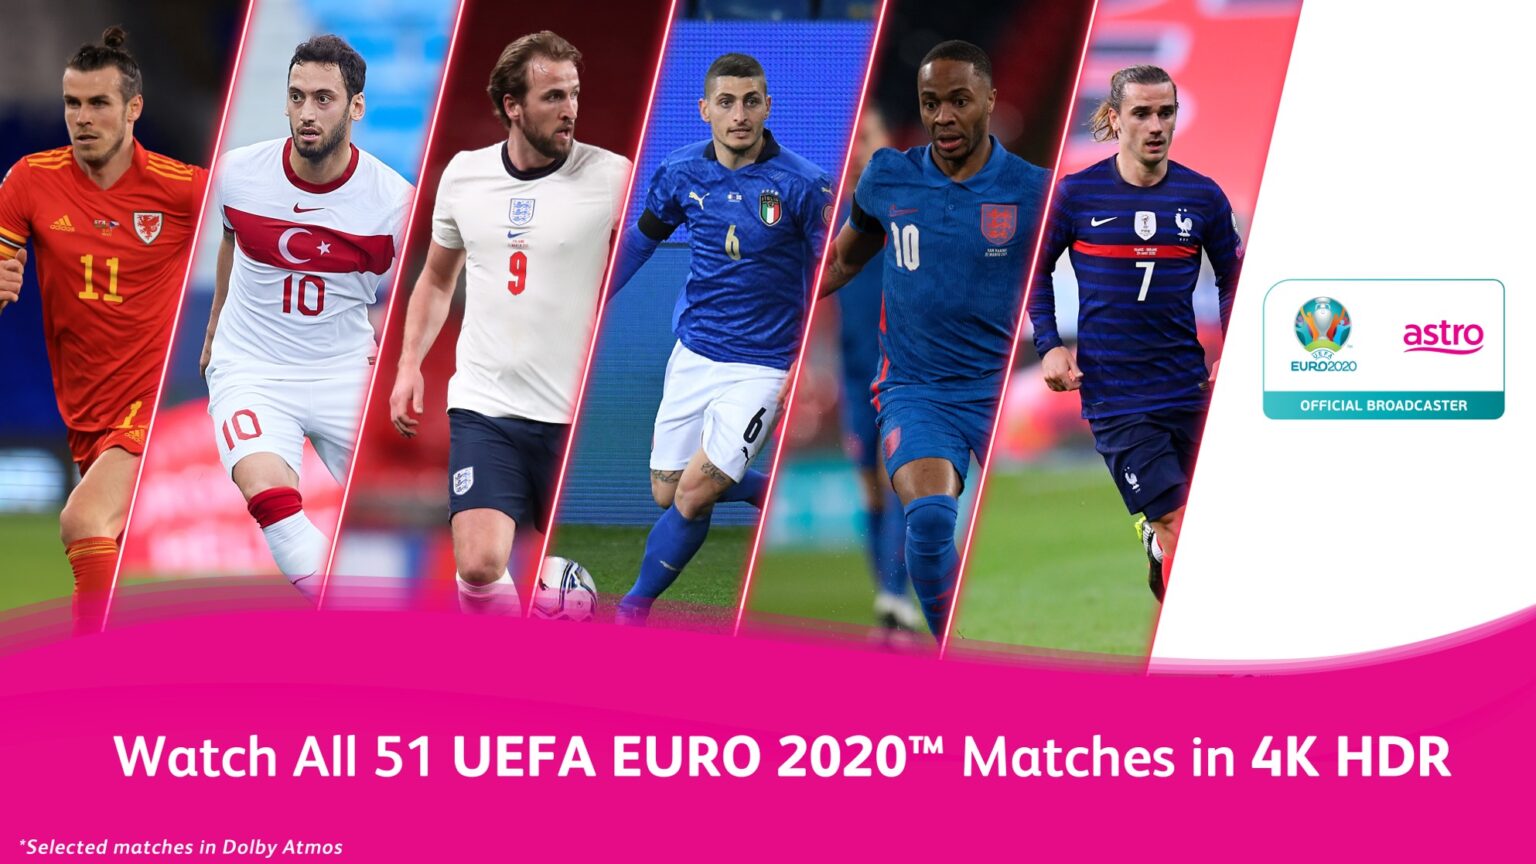 Astro Introduces First 4K HDR Broadcast of UEFA EURO 2020 and Olympic Games Tokyo 2020